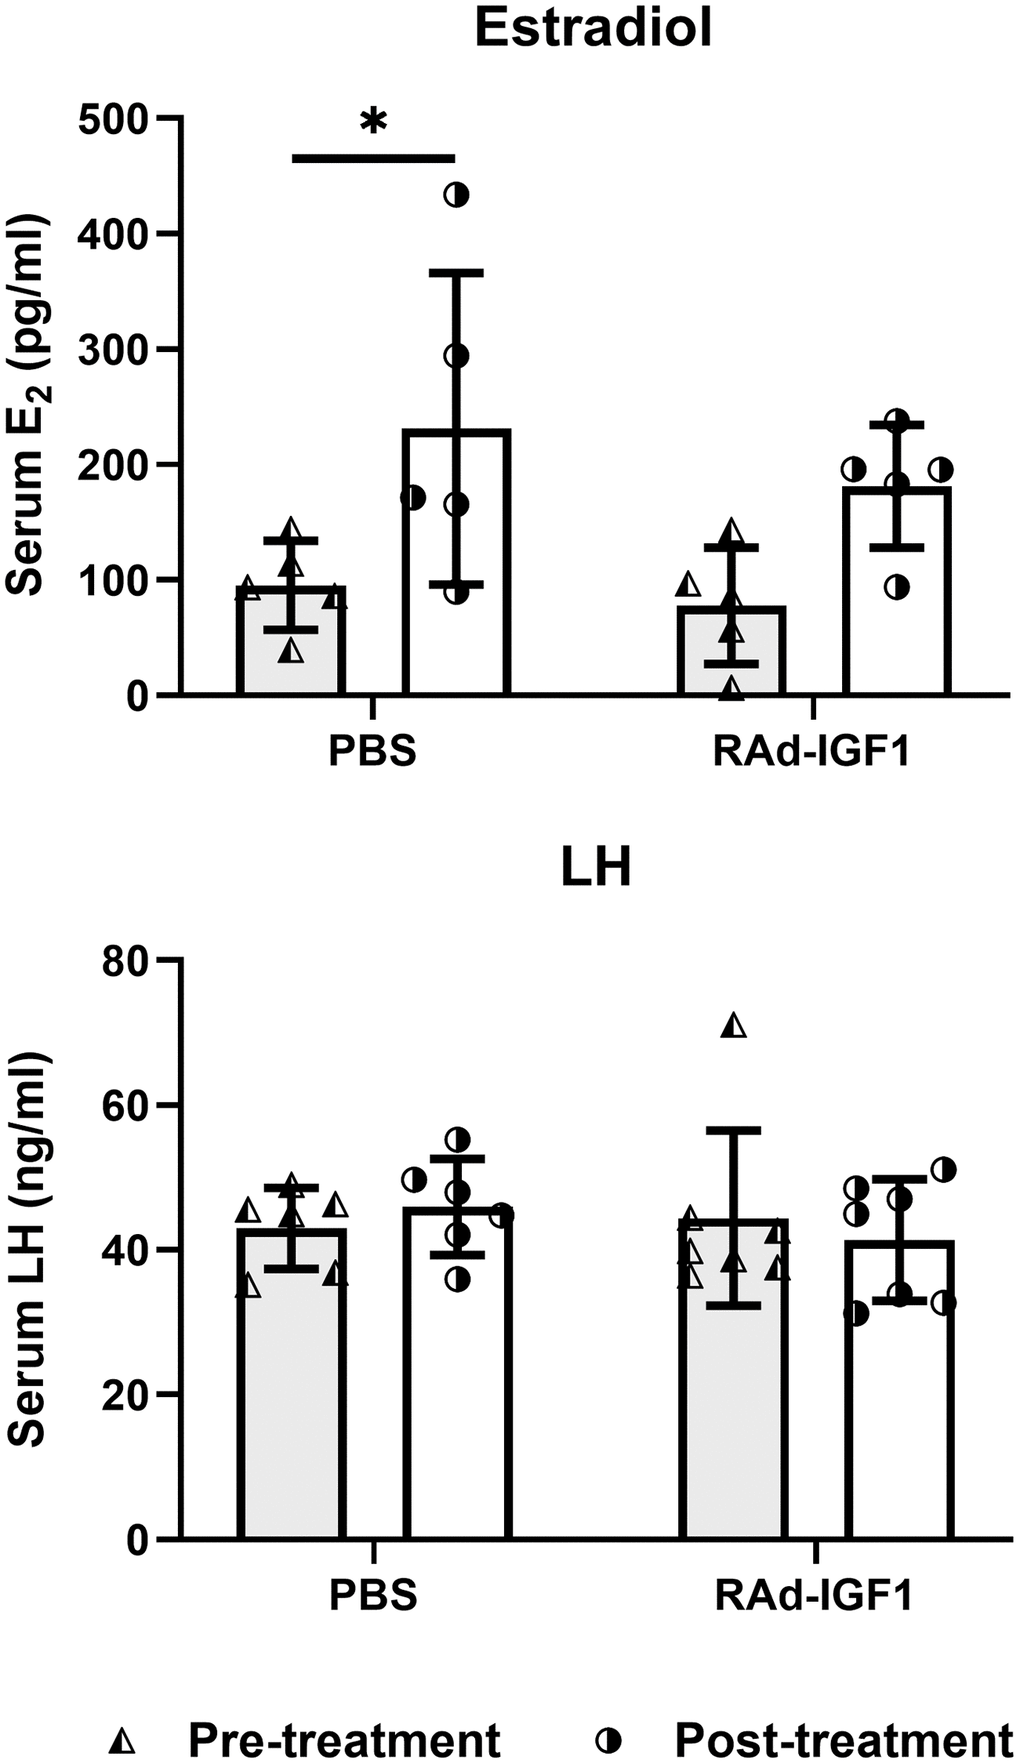 Serum hormone levels in M-A rats before and after IGF1 gene therapy. Blood samples were collected from the tail veins at the beginning (pre-treatment) and at the end of the study. Column height and bar above represents mean and SD respectively (Estradiol: NRAd-IGF1 = 5; NPBS= 5. LH: NRAd-IGF1 = 7; NPBS = 6). ANOVA followed by the Bonferroni’s multiple comparisons test was used. Asterisks indicate significant (*p Figure 3Estradiol post hoc power (1-β) analysis: 0. 5592 (both factors); Figure 3LH post hoc power (1-β) analysis: 0. 6834 (both factors).